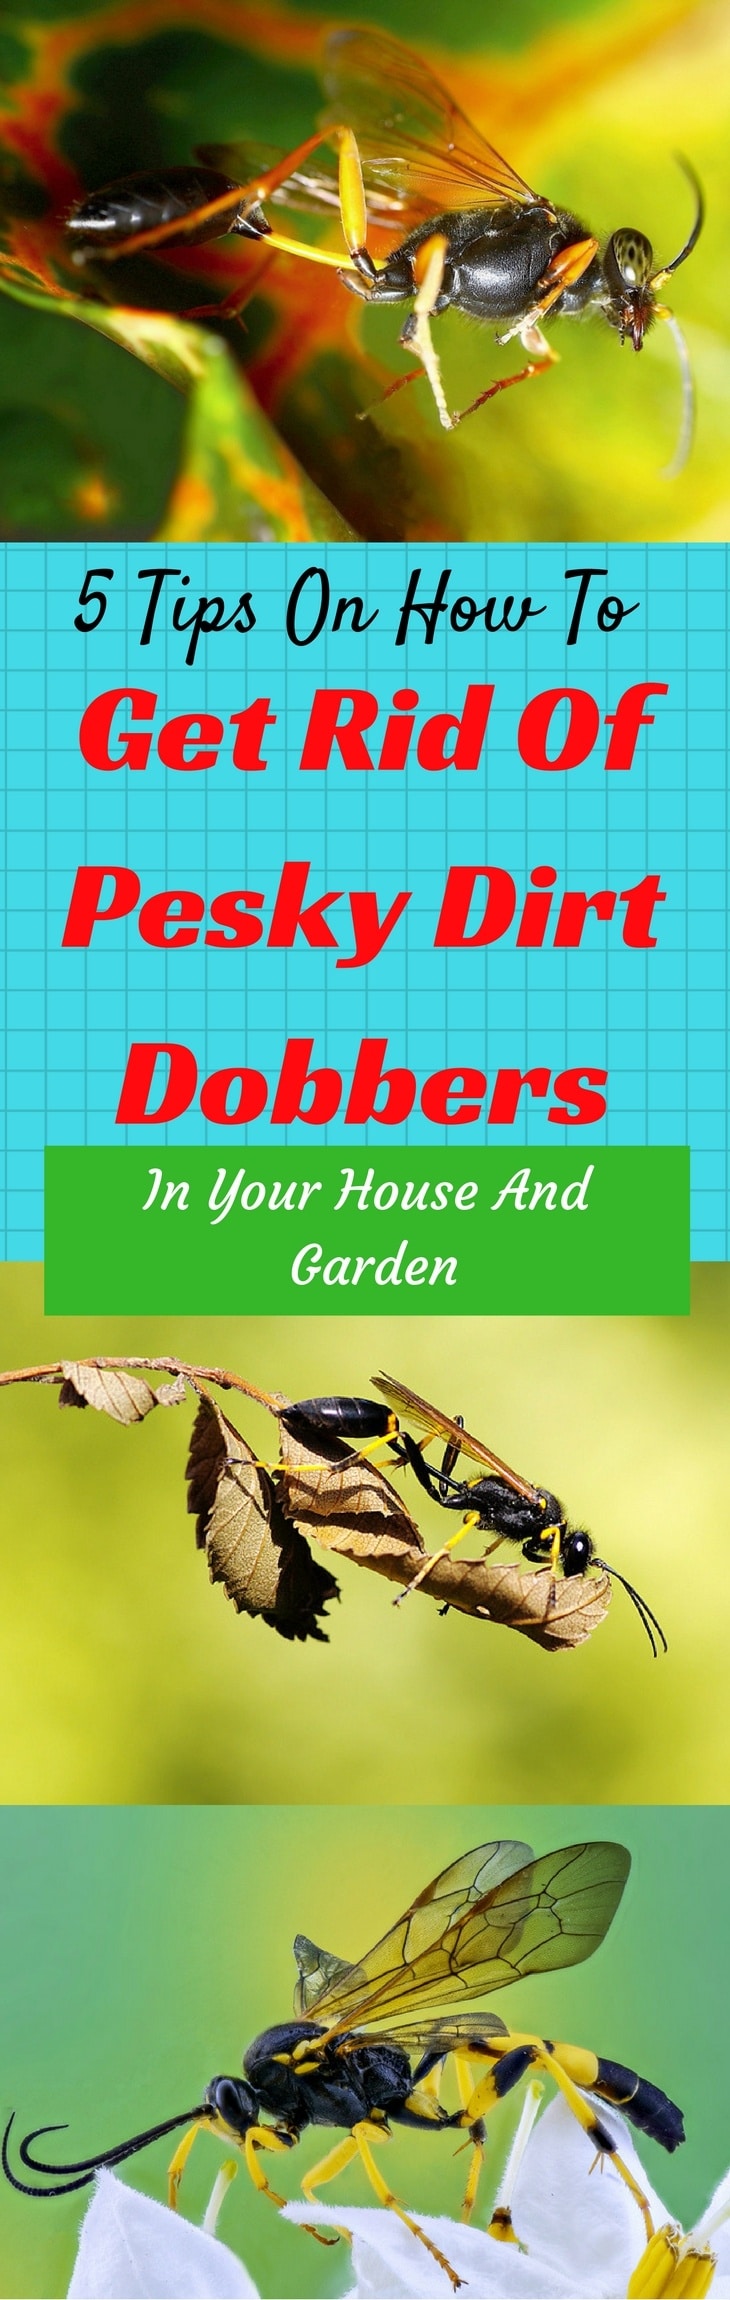 how to get rid of dirt dobbers 